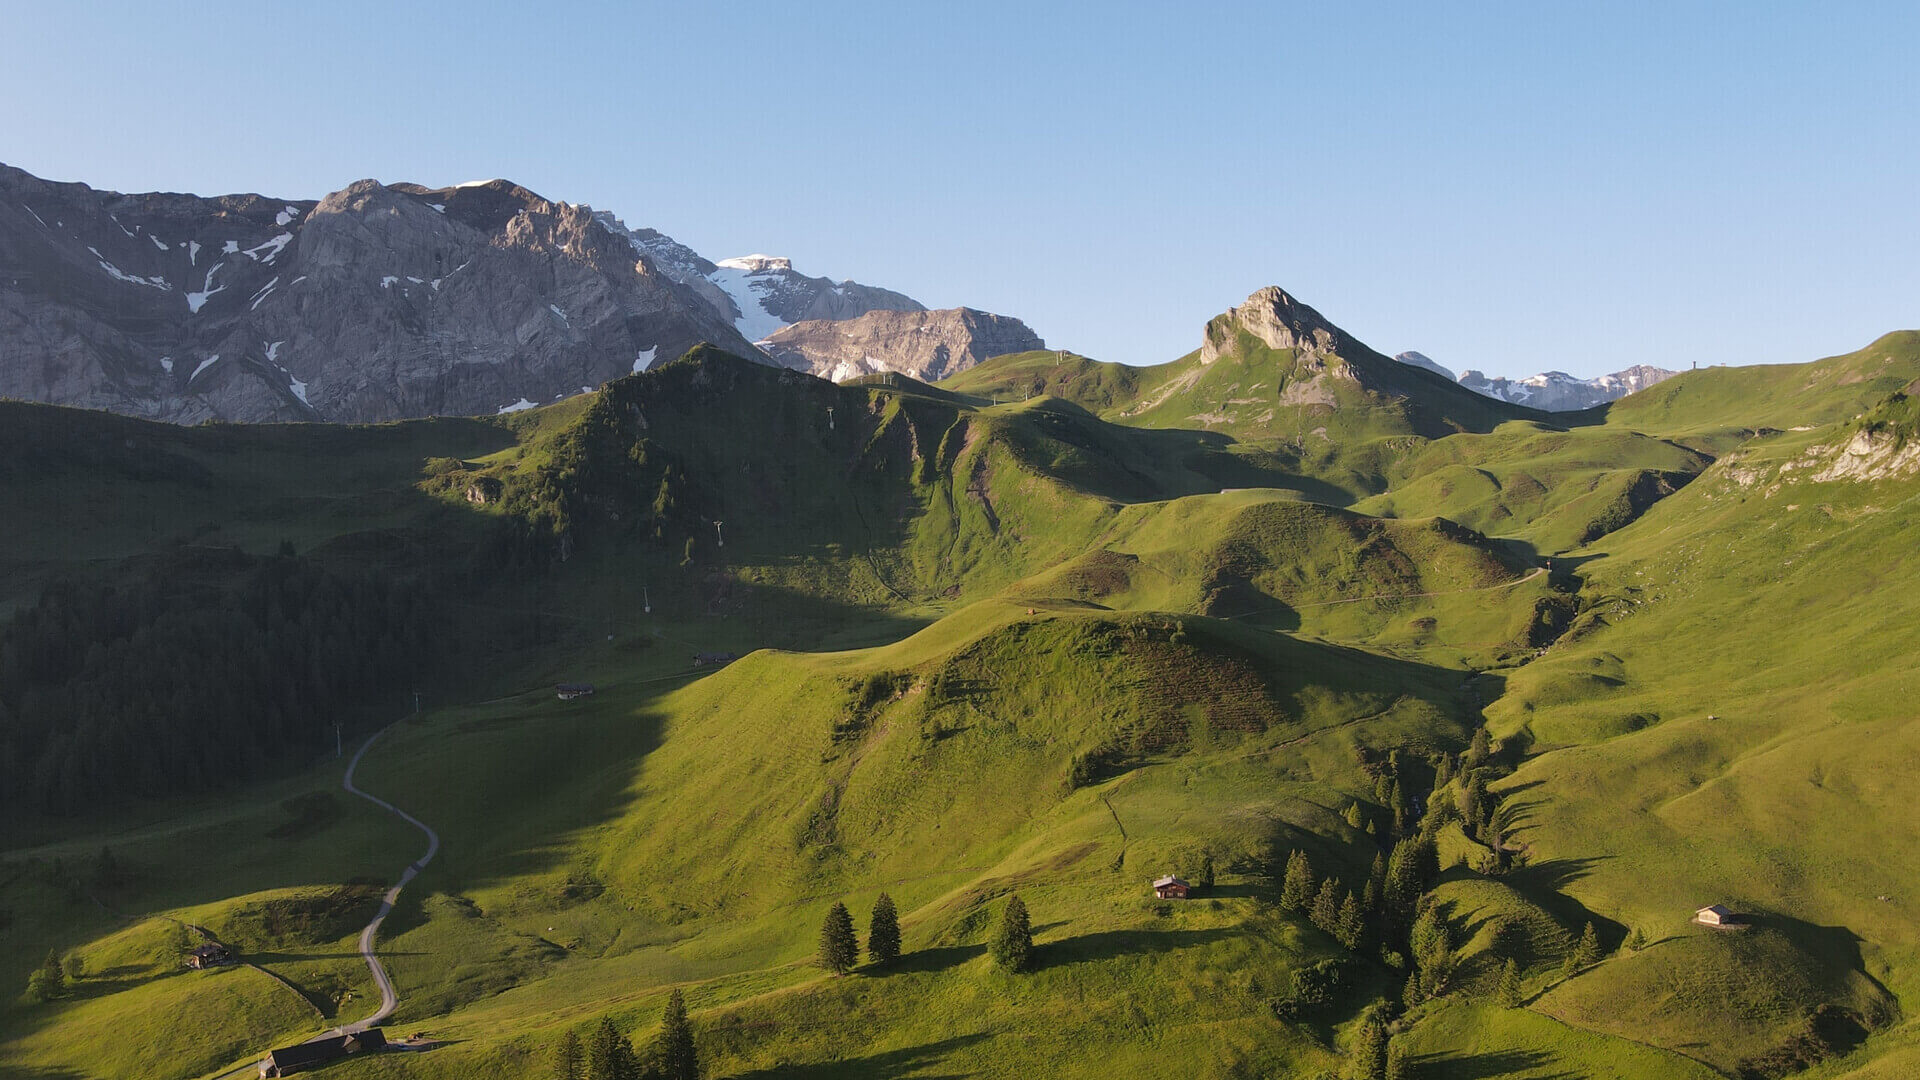 Sightseeing tips in Adelboden not to miss